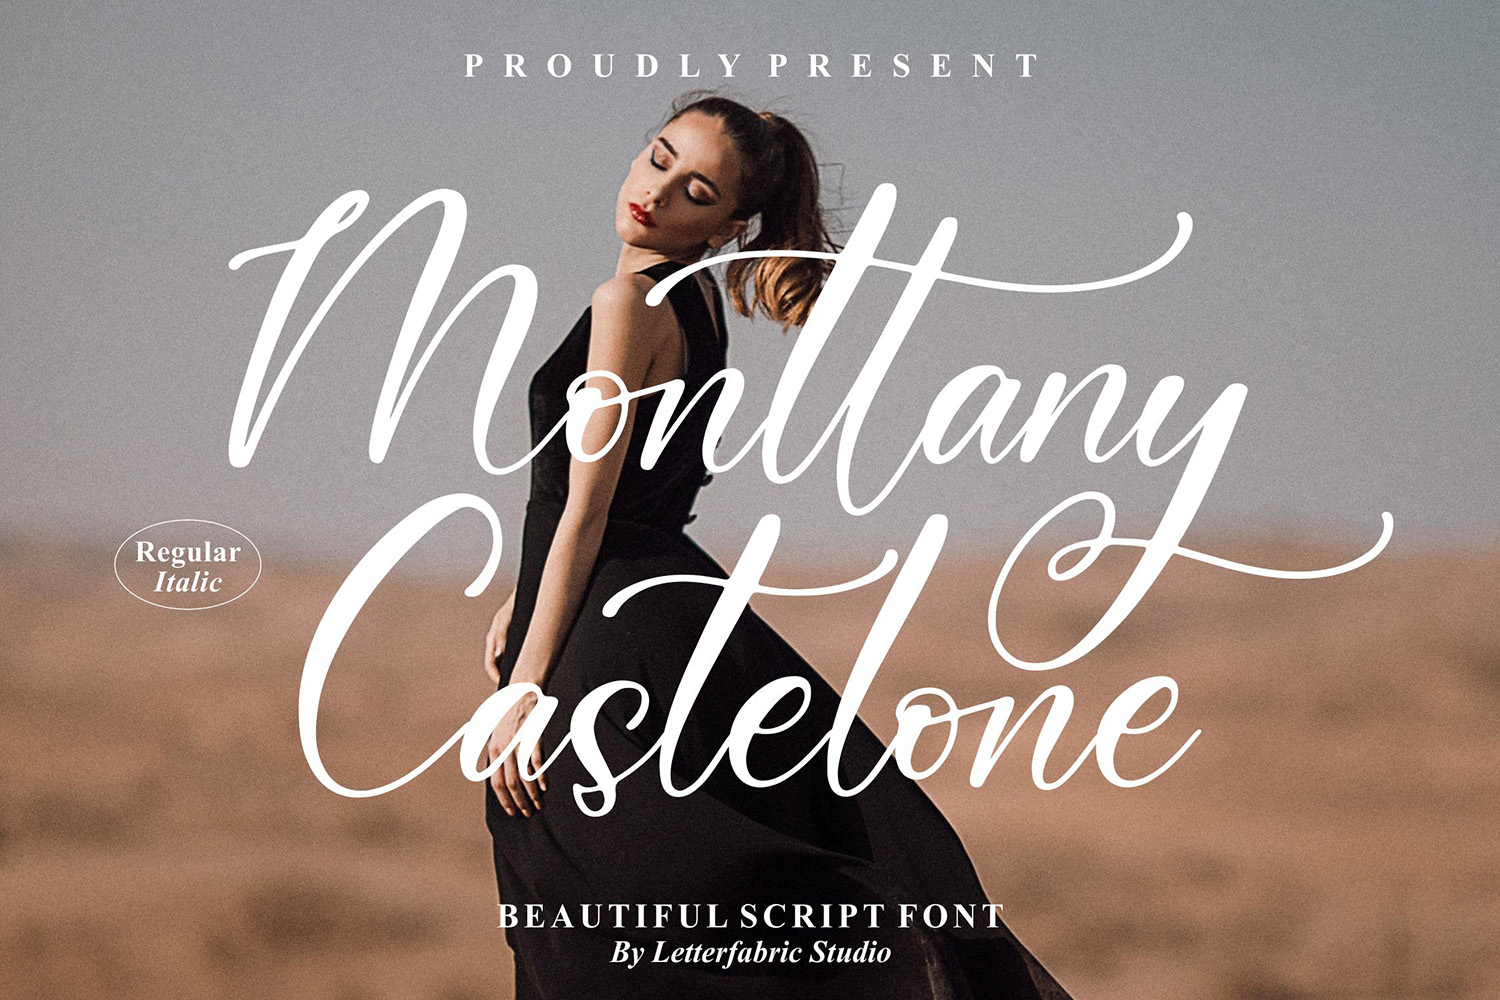 Monttany Castelone Free Font